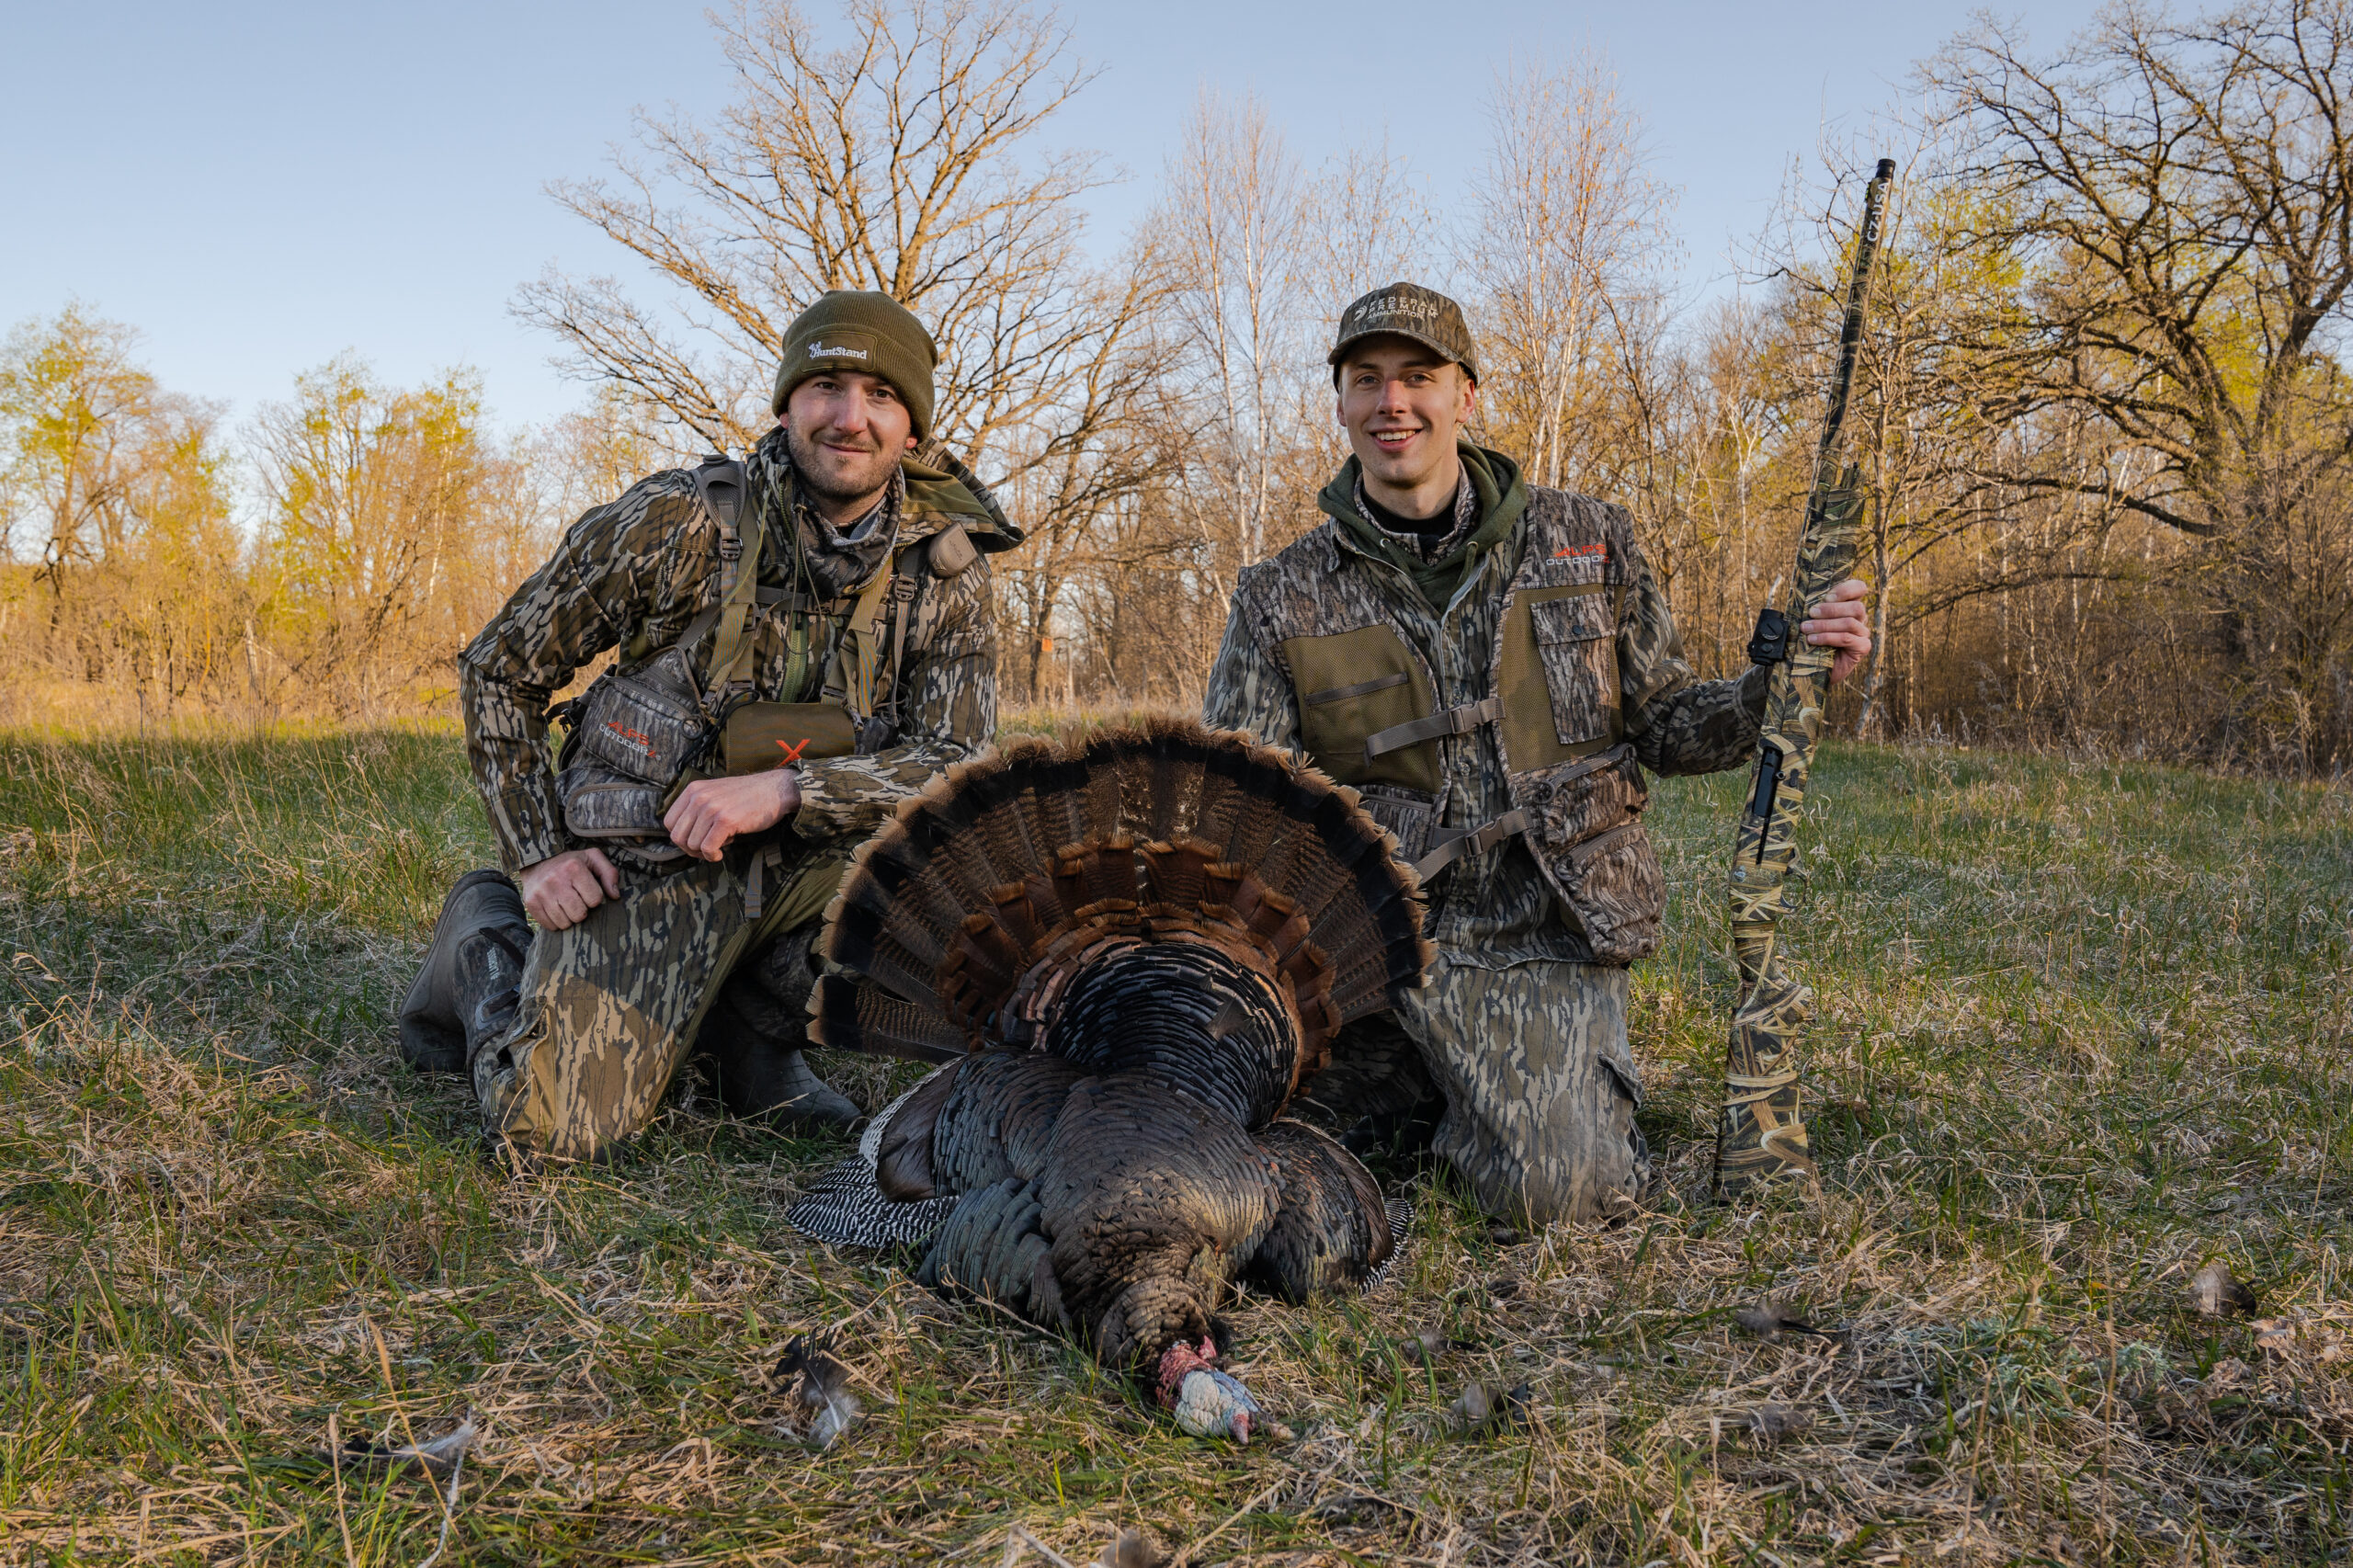 If you don't score a gobbler during one of the 7-day seasons, you have two weeks at the end of May to come back and tag out.